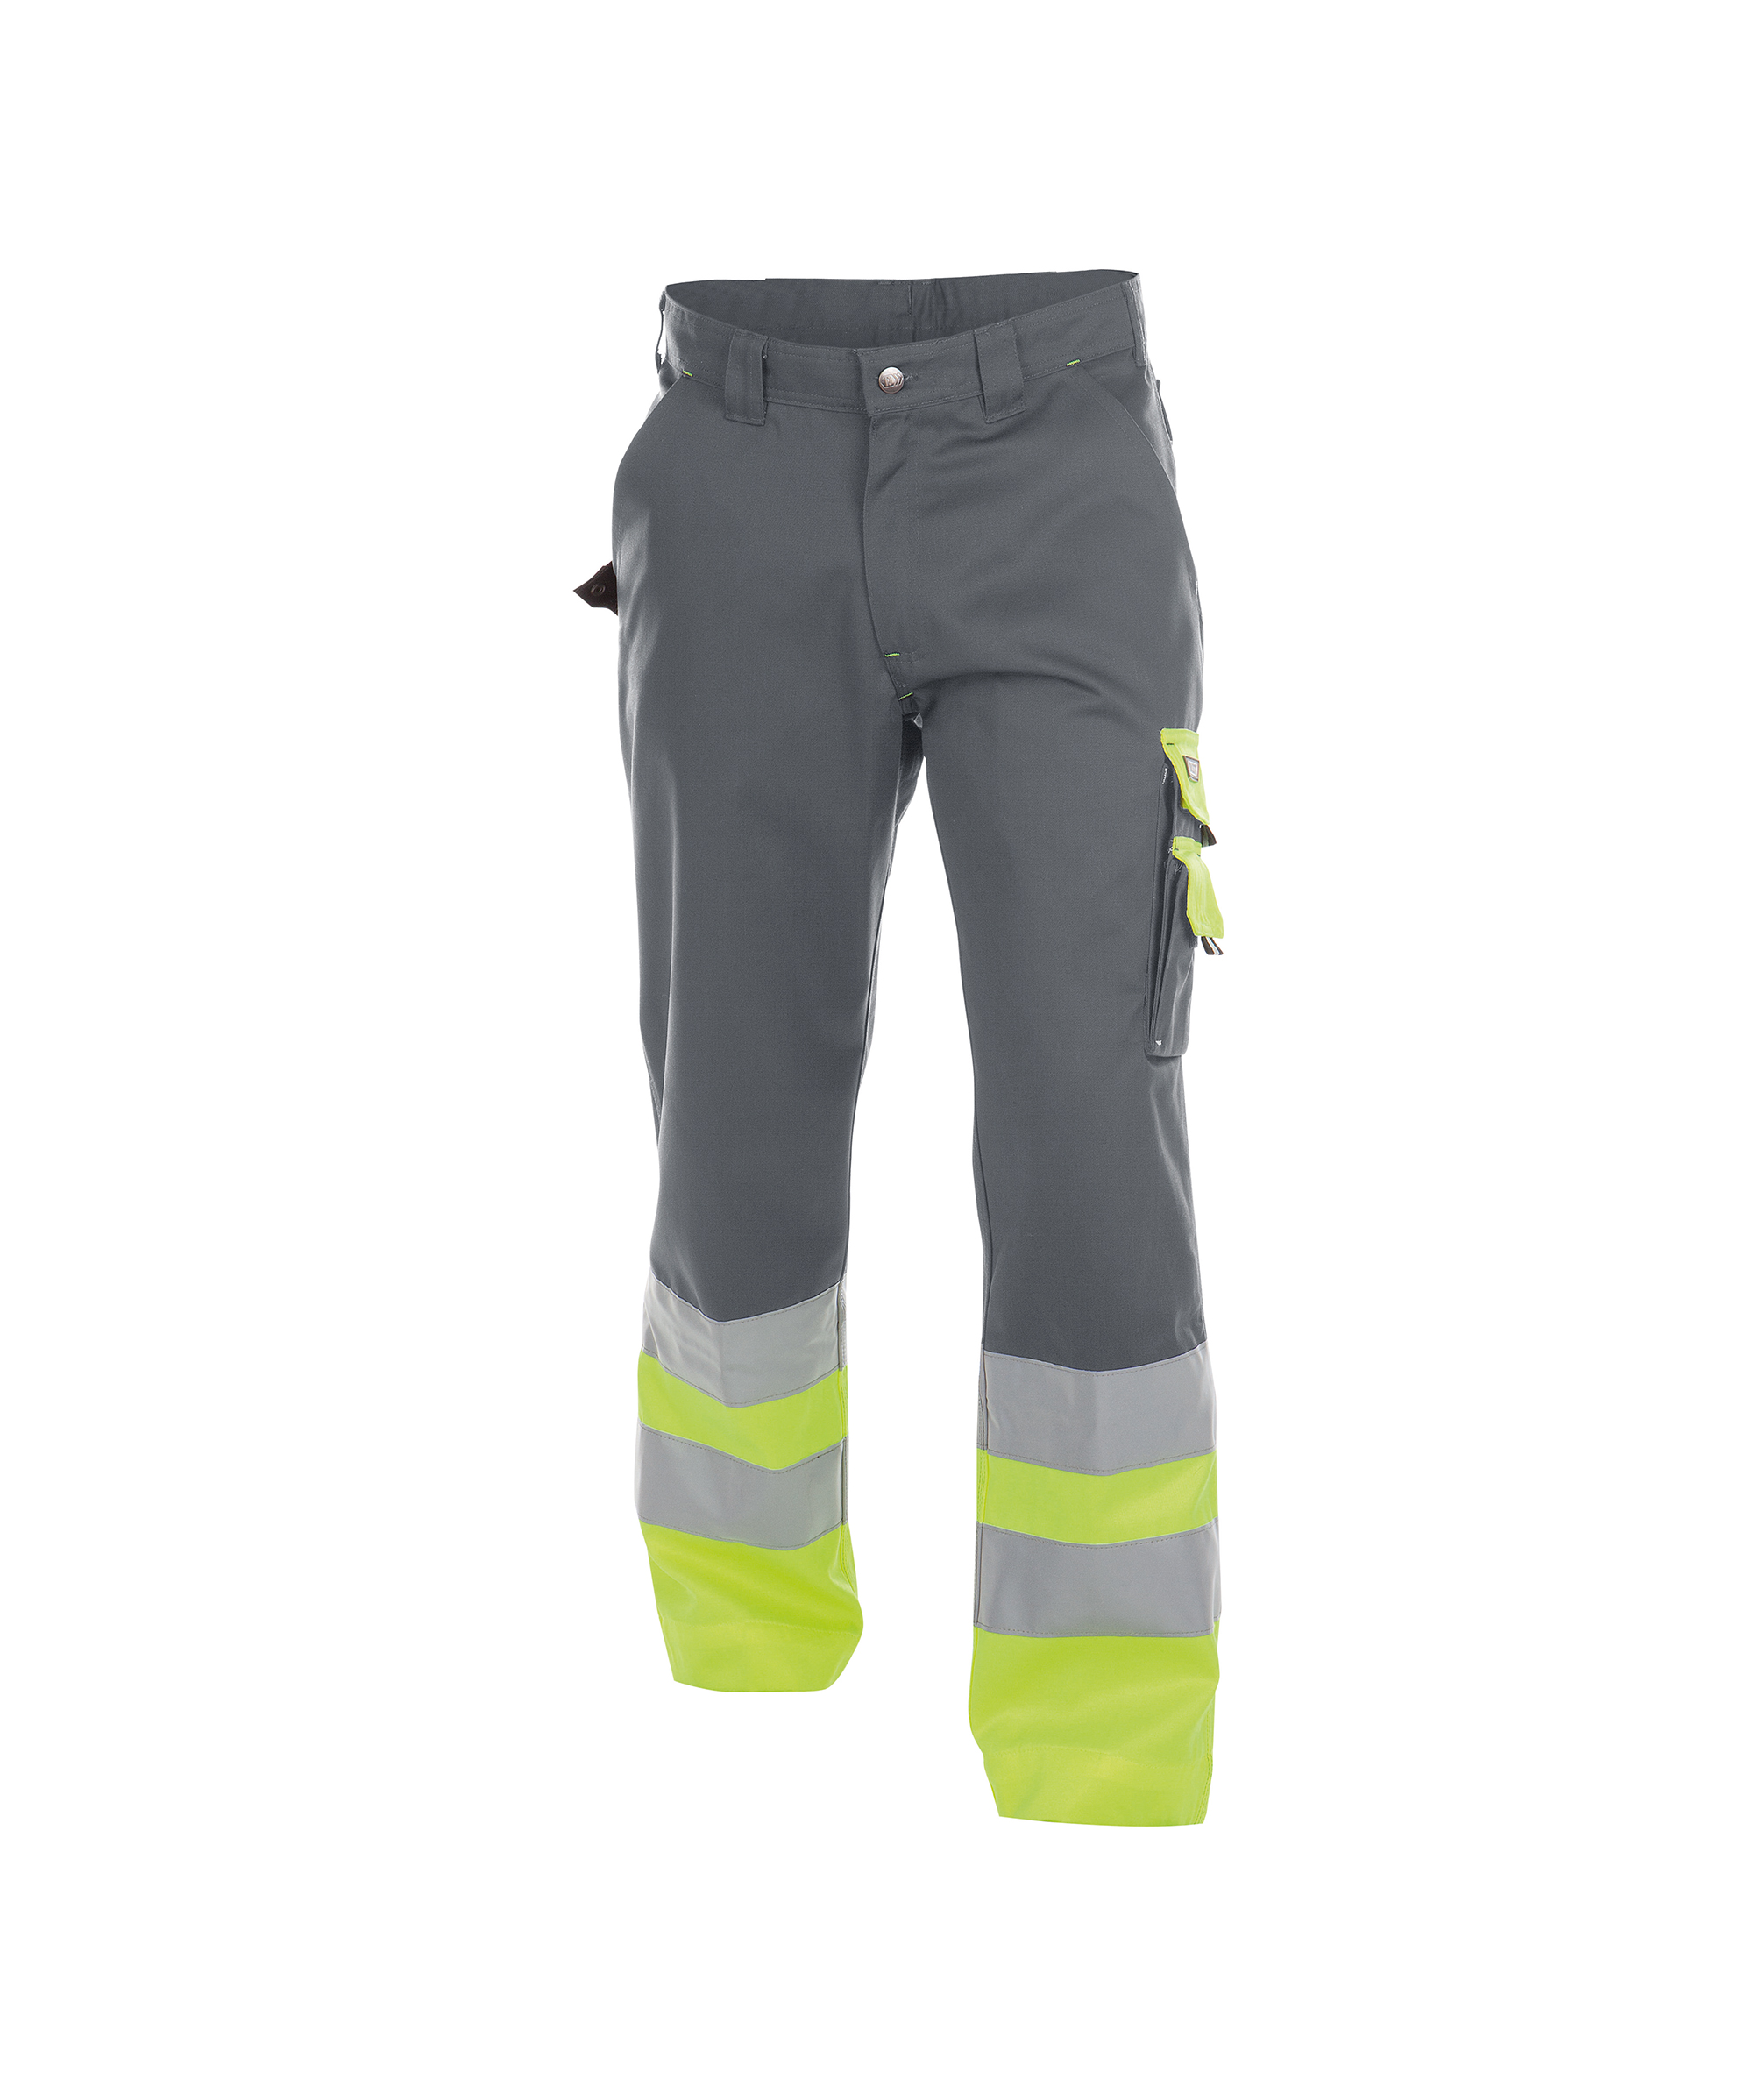 omaha_high-visibility-work-trousers_cement-grey-fluo-yellow_front.jpg